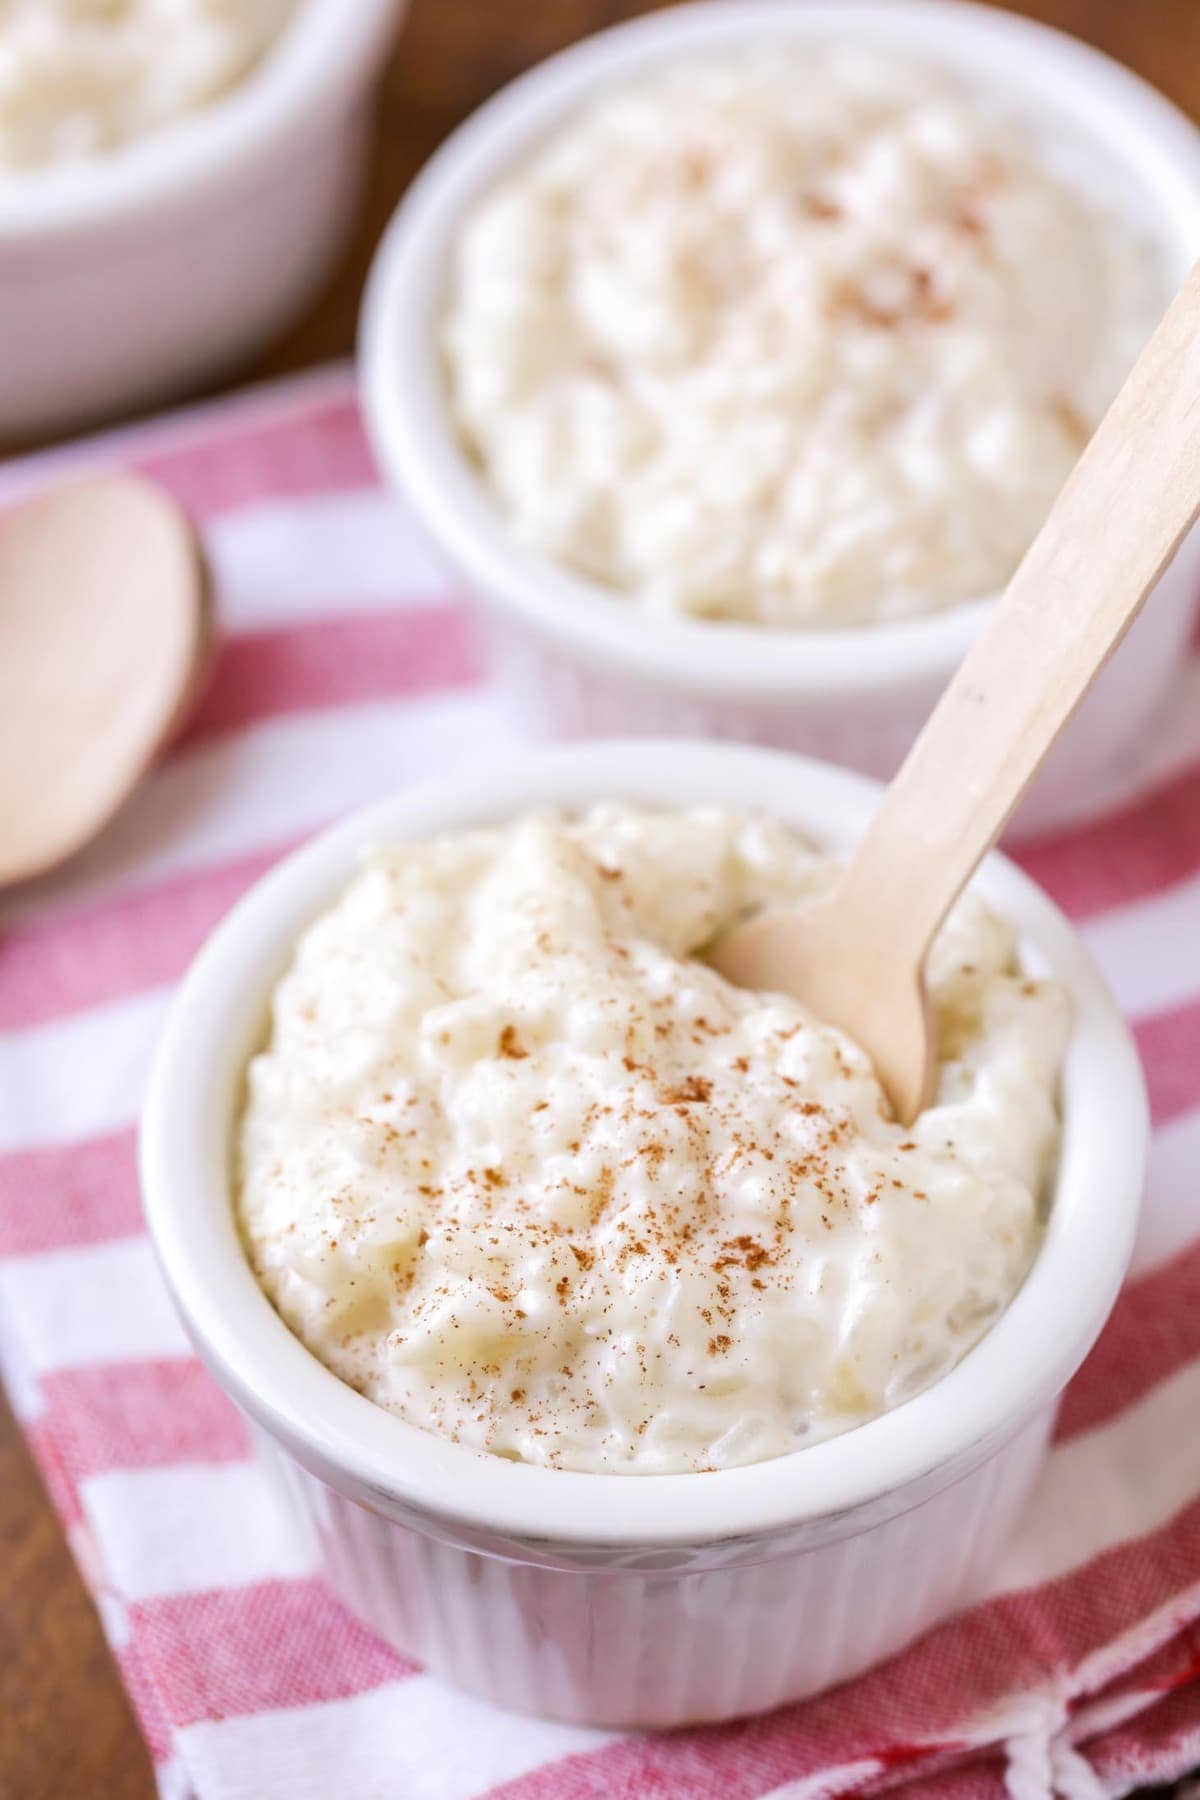 Creamy rice pudding in small white bowls